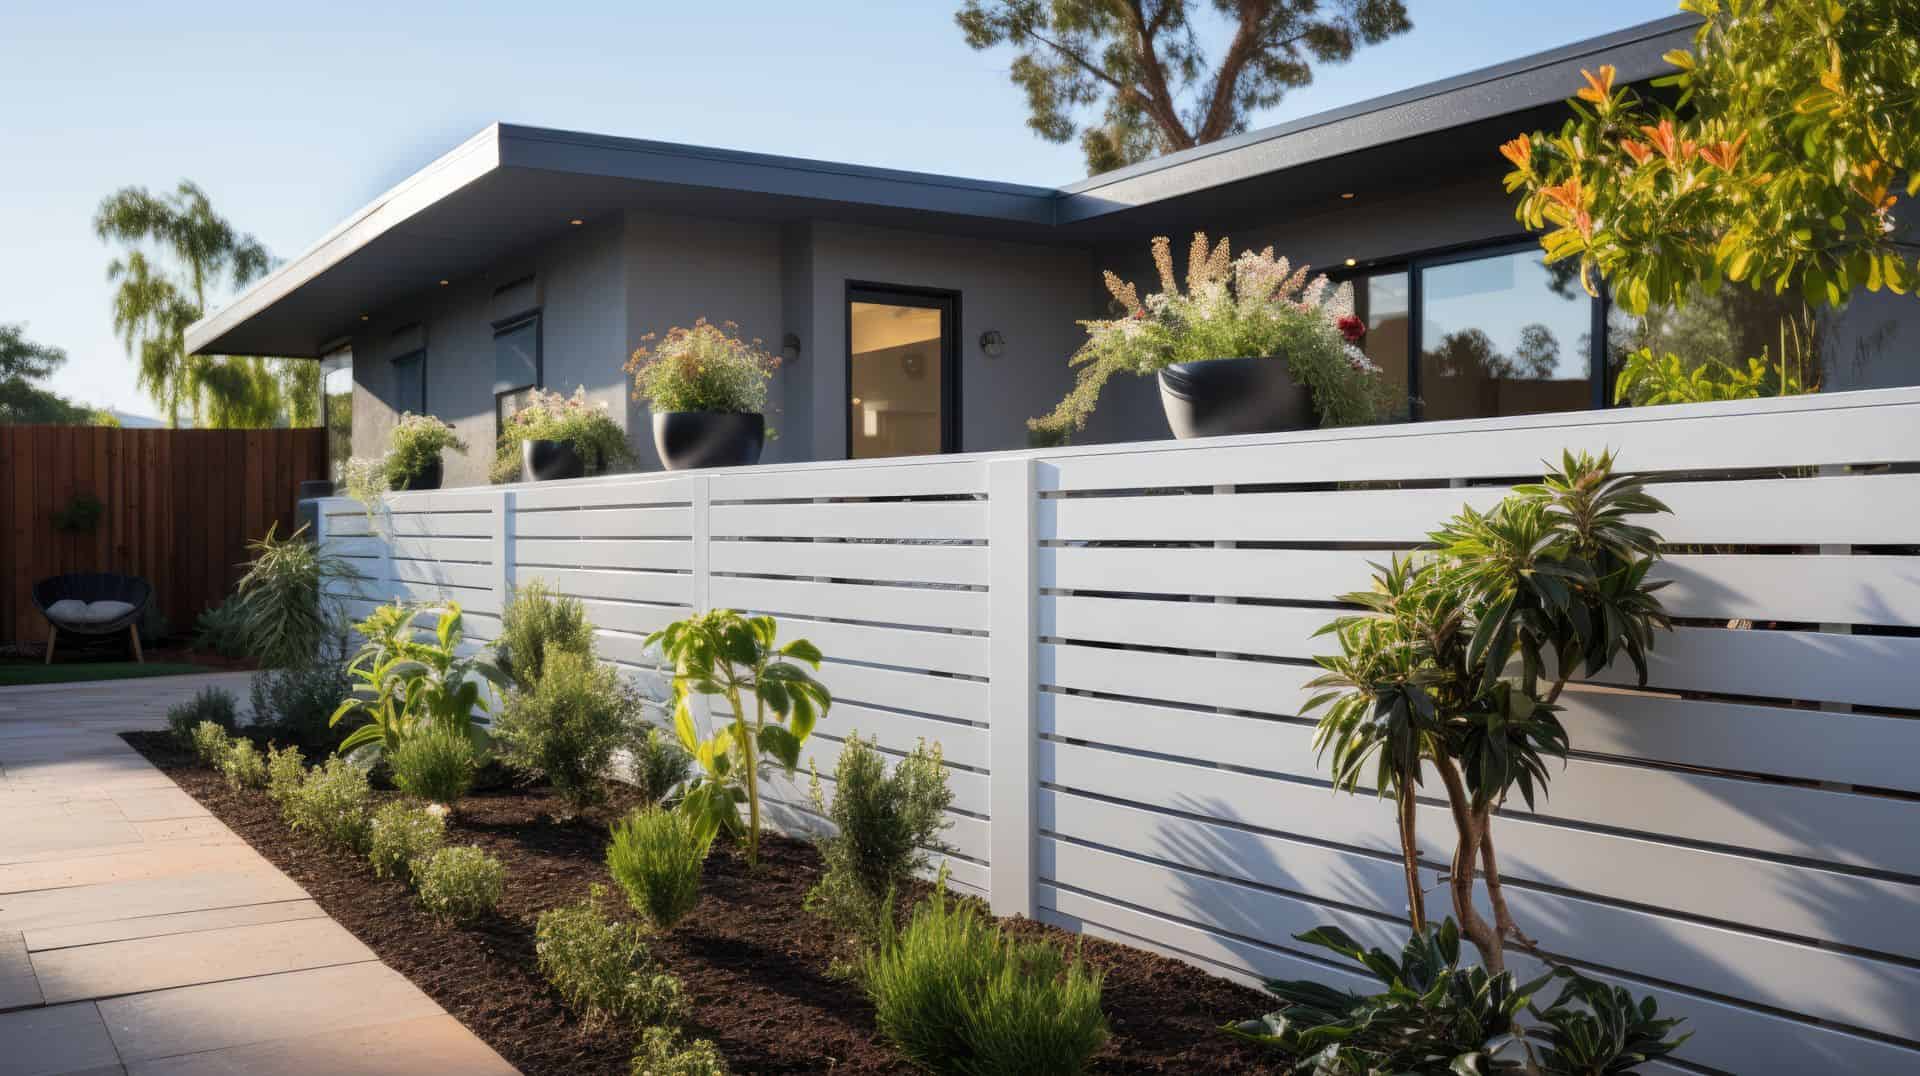 Vinyl picket fence with gates opening up to individual concrete driveways from the road along with each front lawn